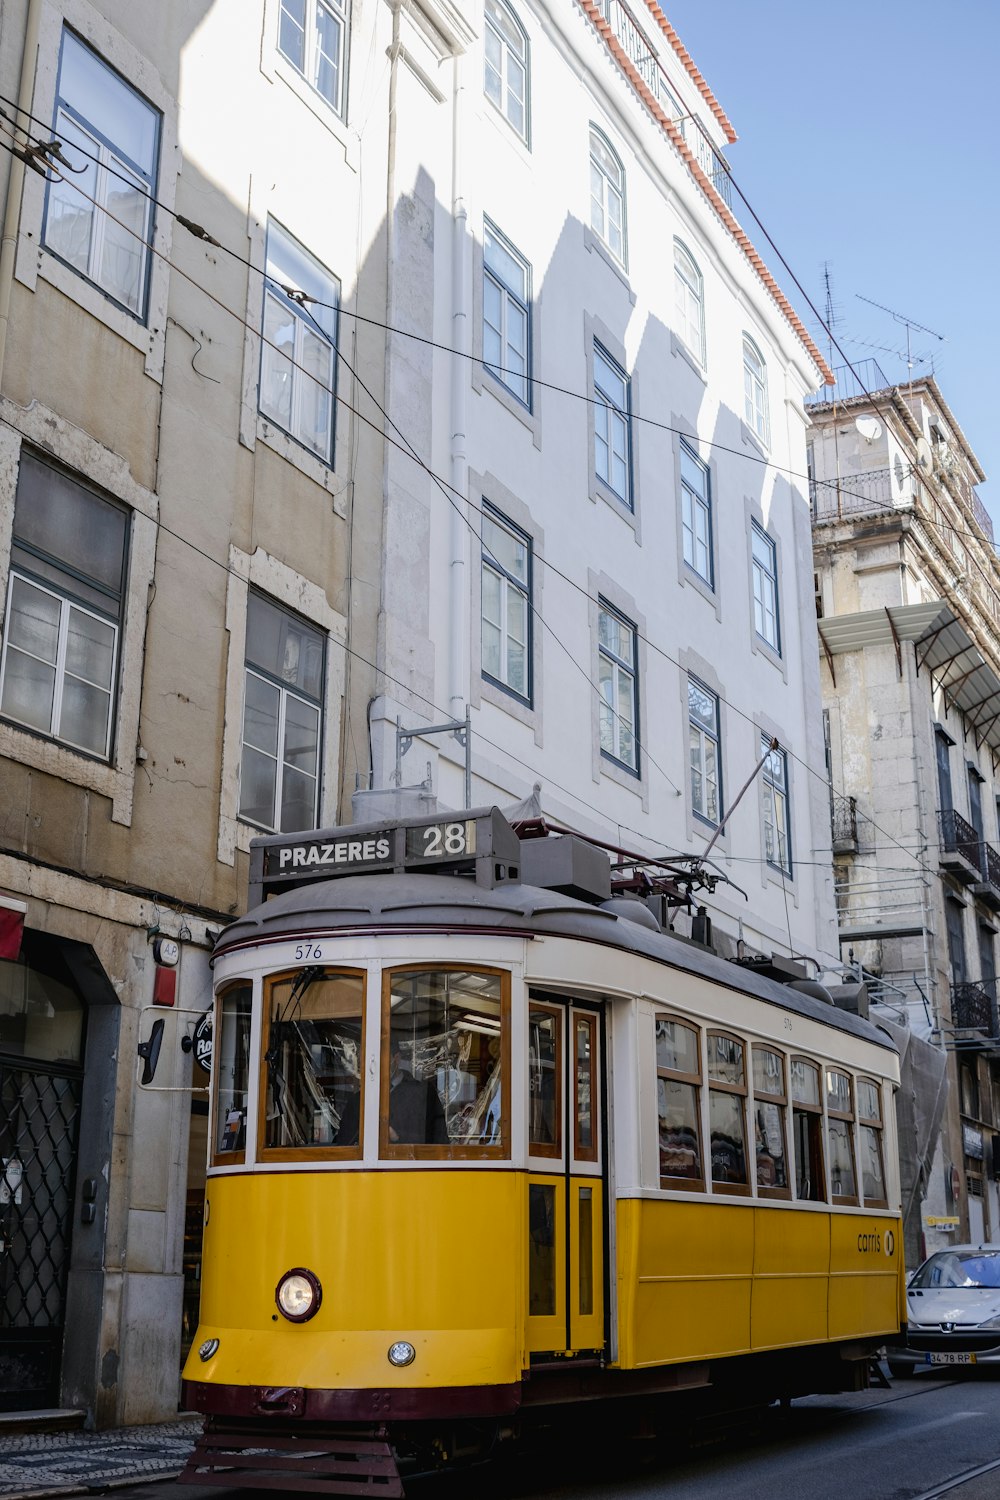 a yellow trolley car traveling down a street next to tall buildings